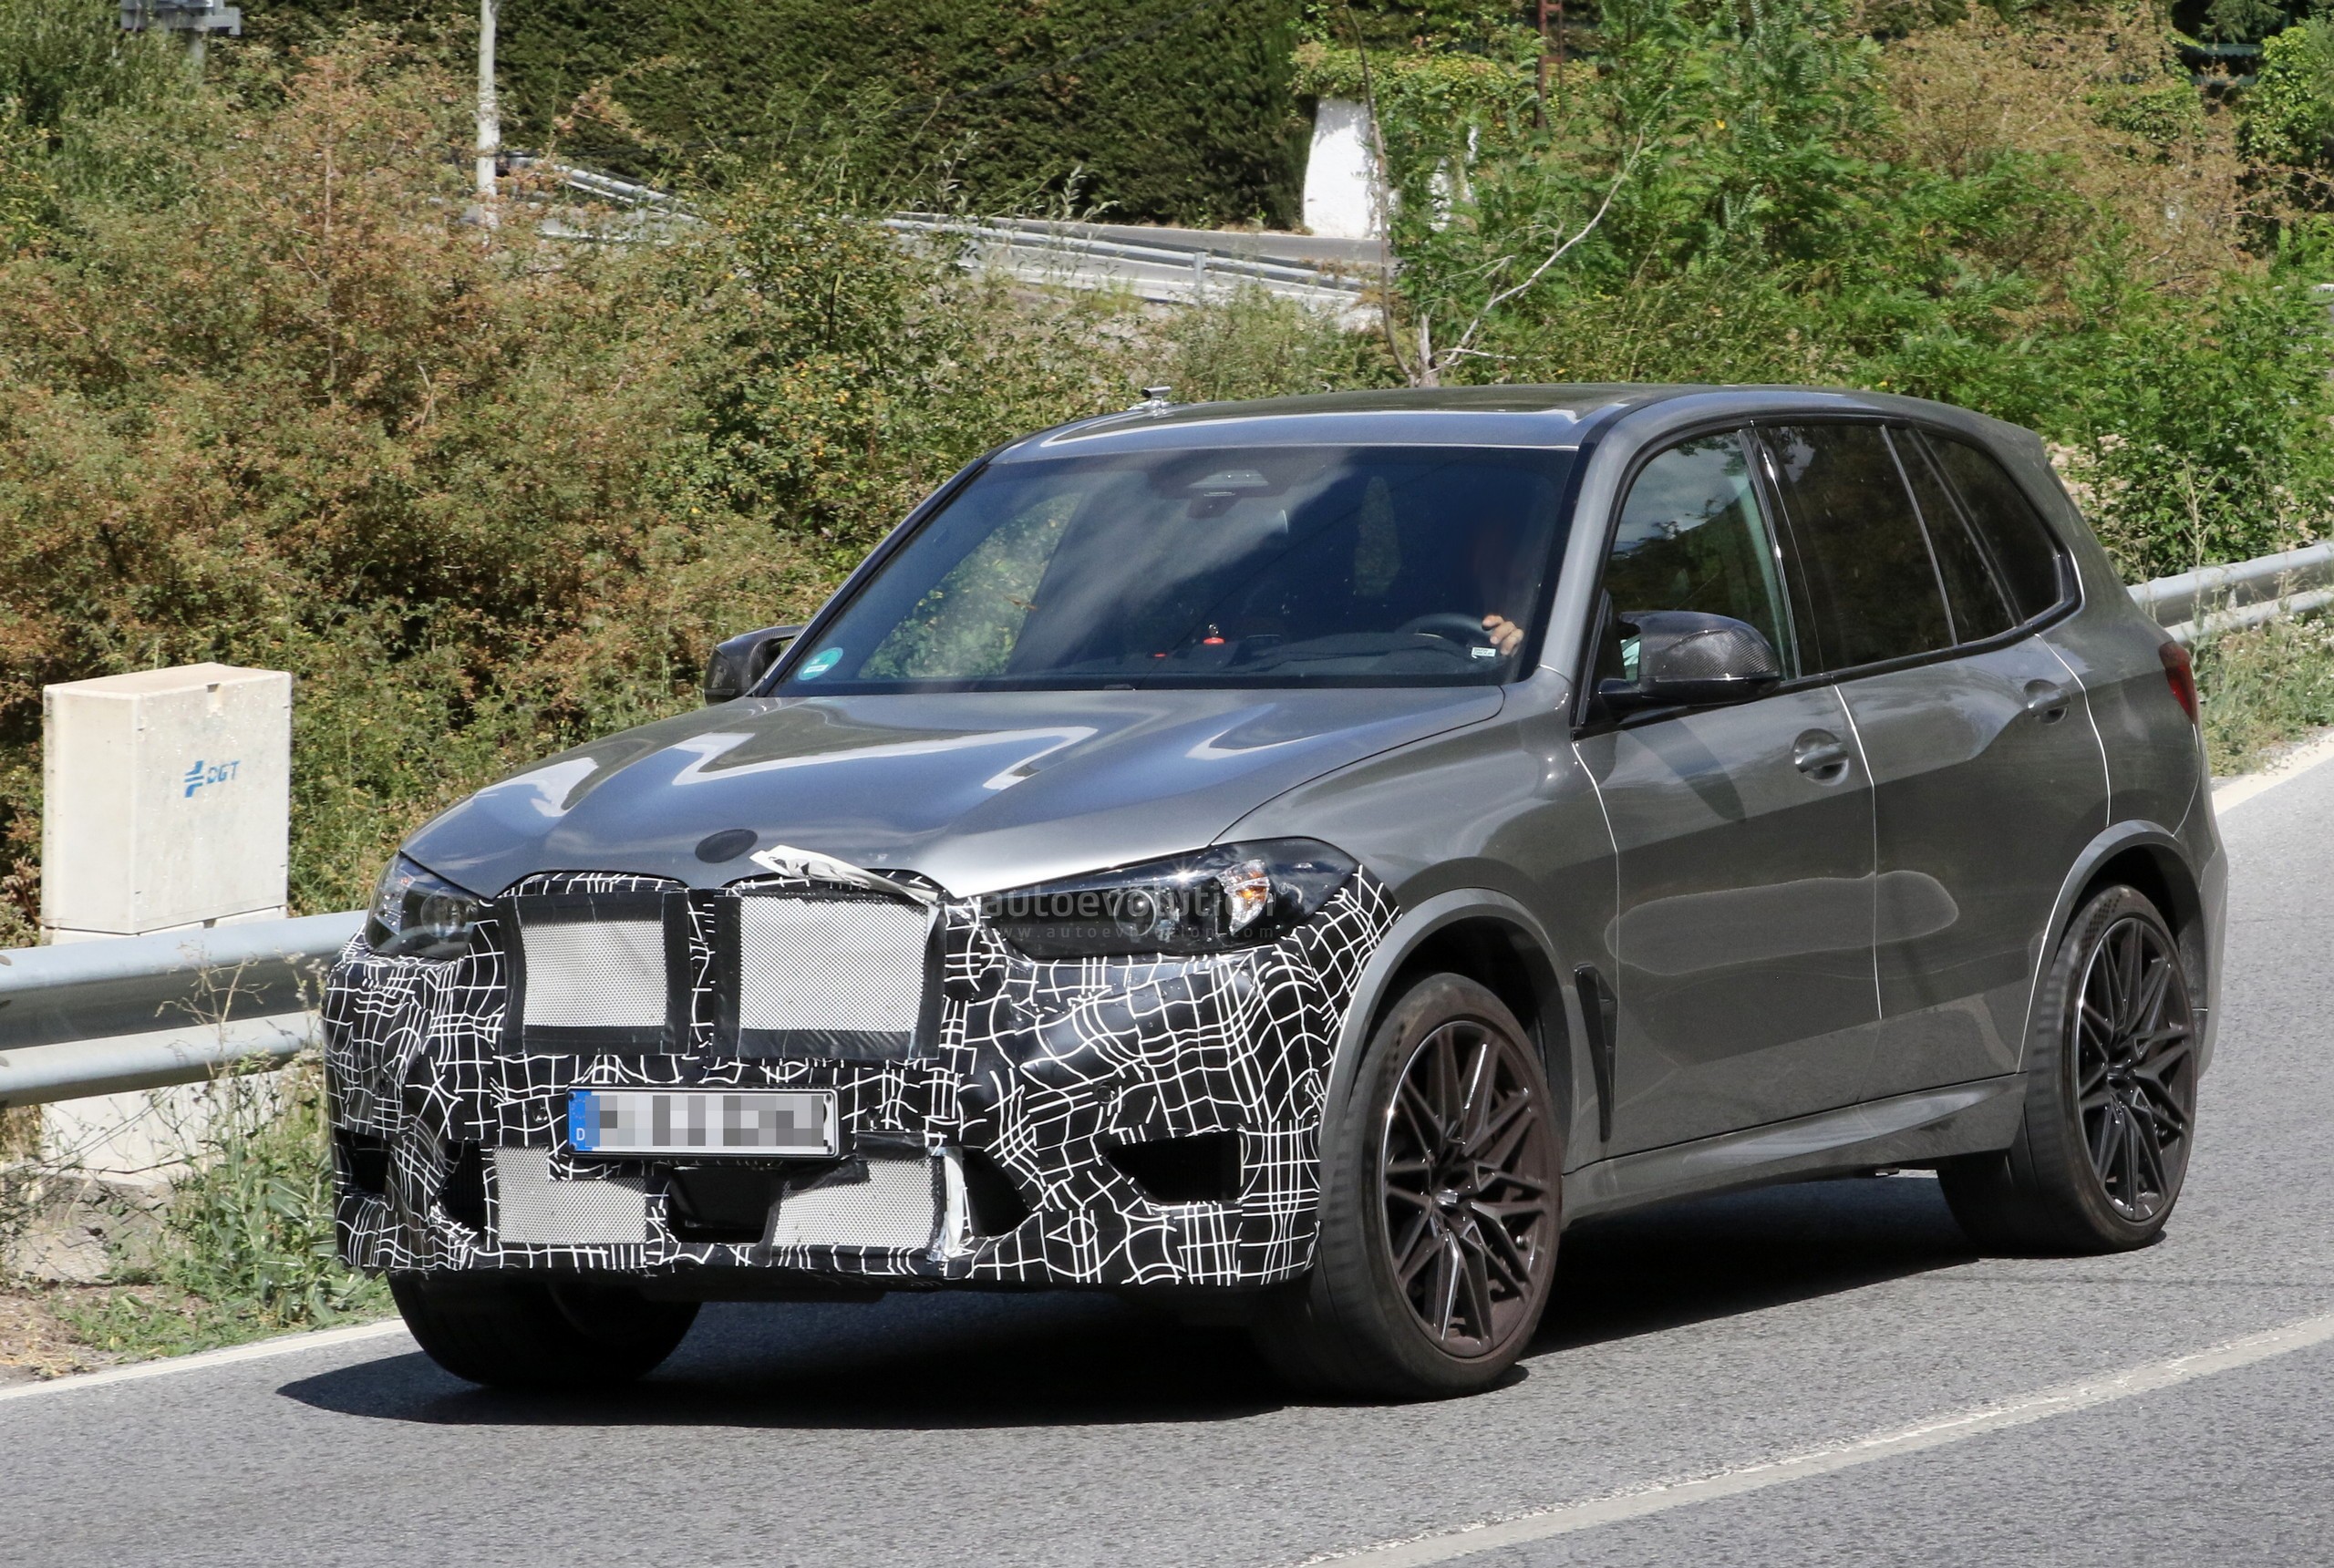 G05 BMW X5 M LCI Makes Surprise Appearance With Almost No